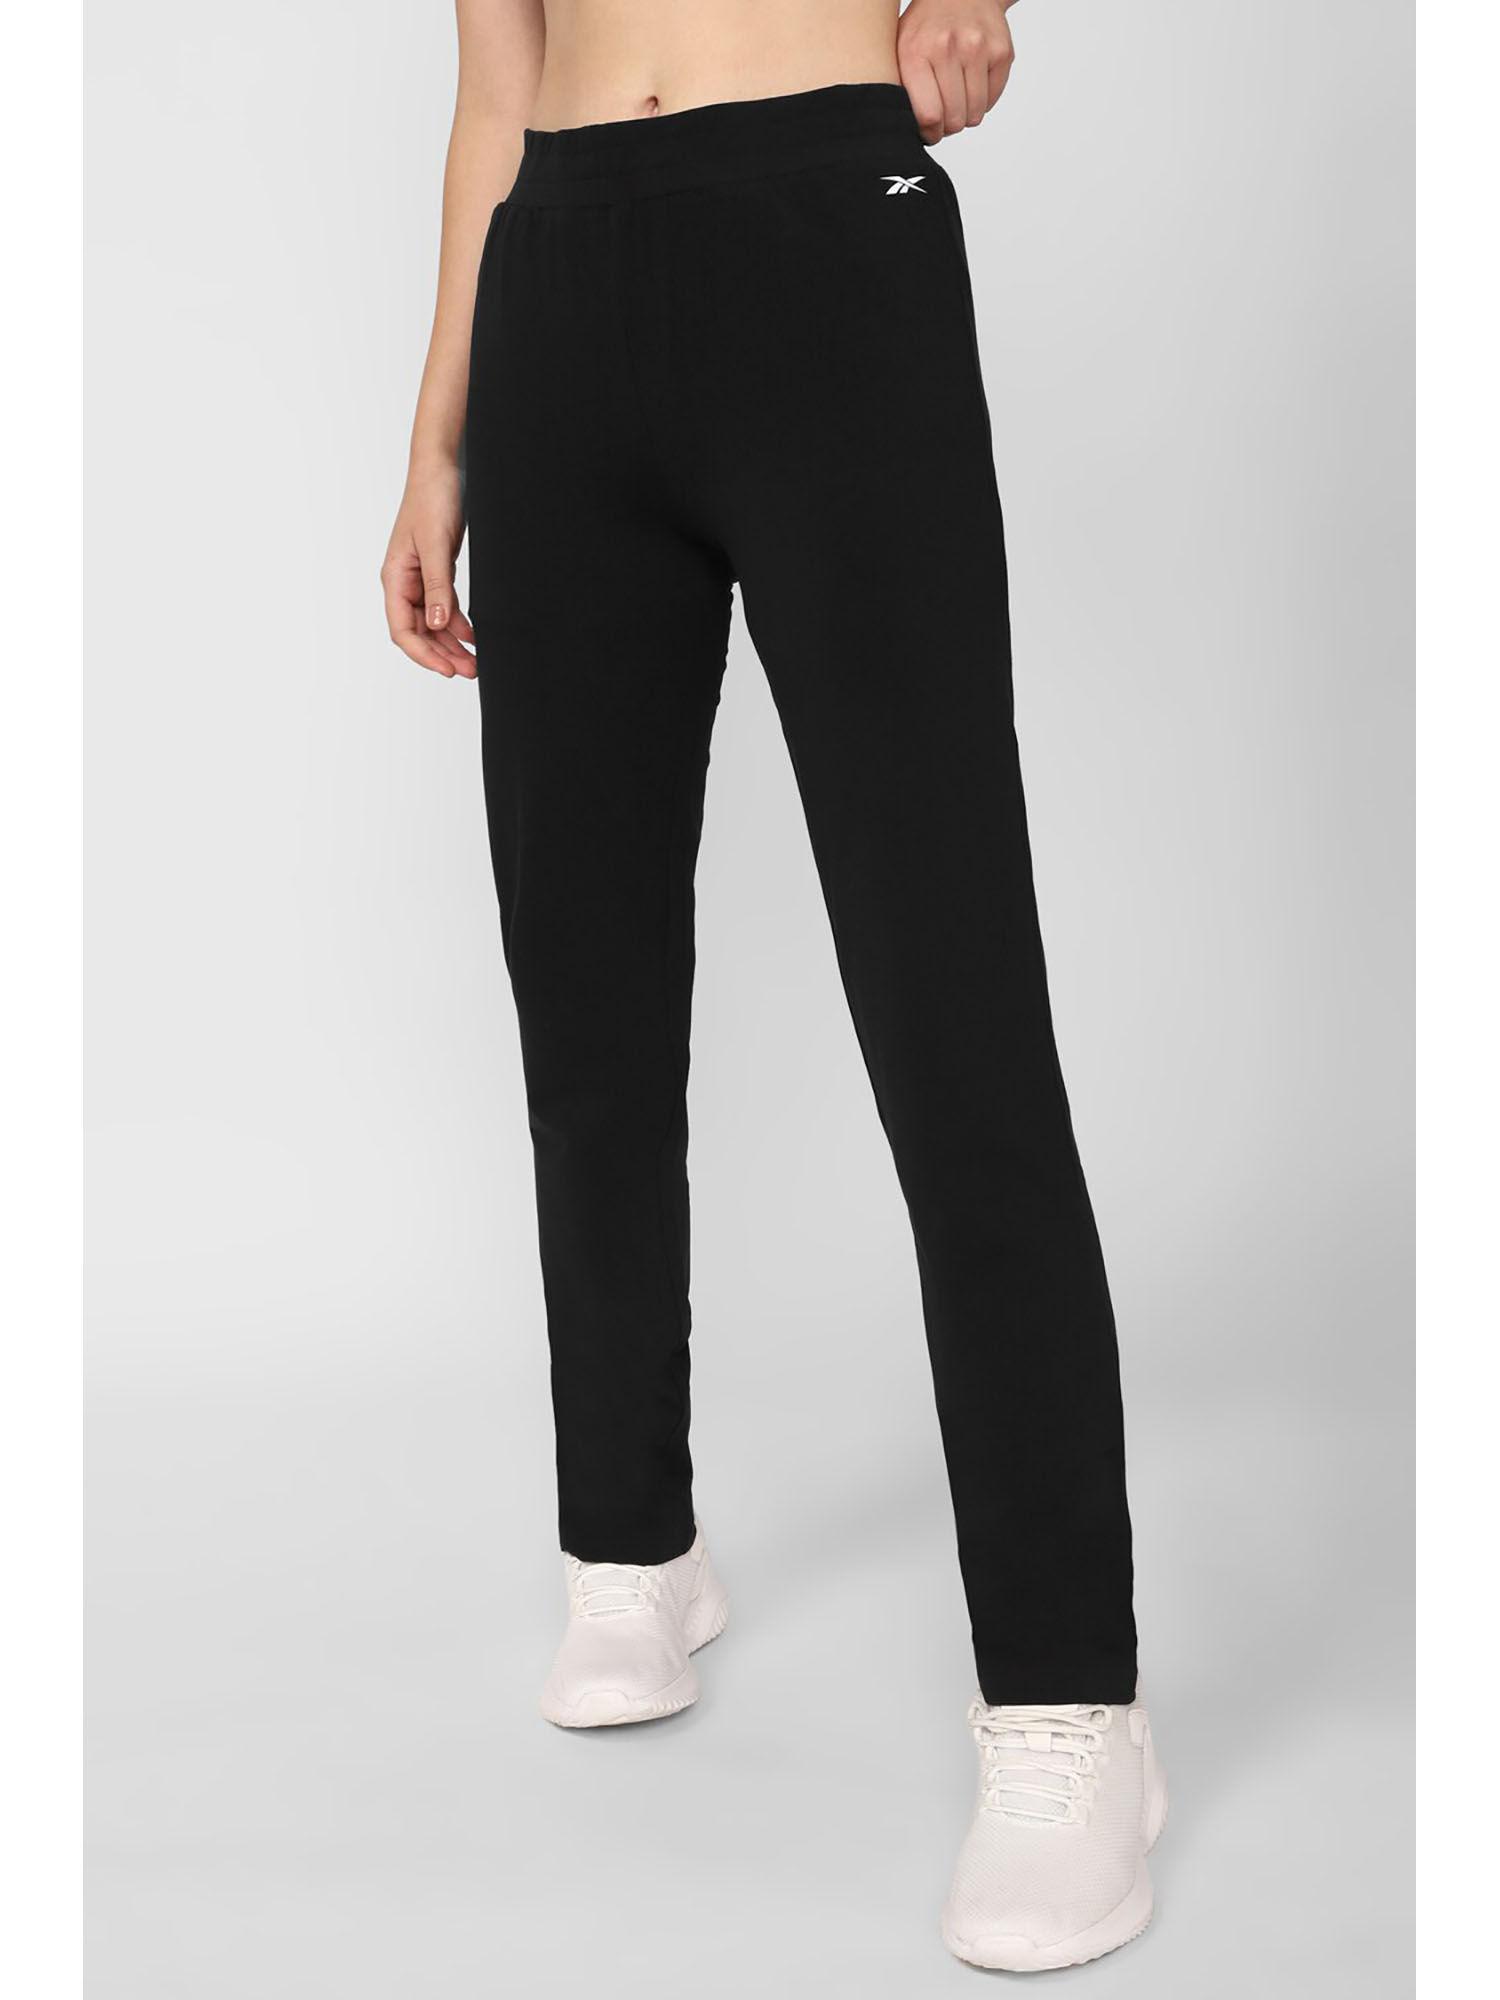 women fnd w black solid track pant